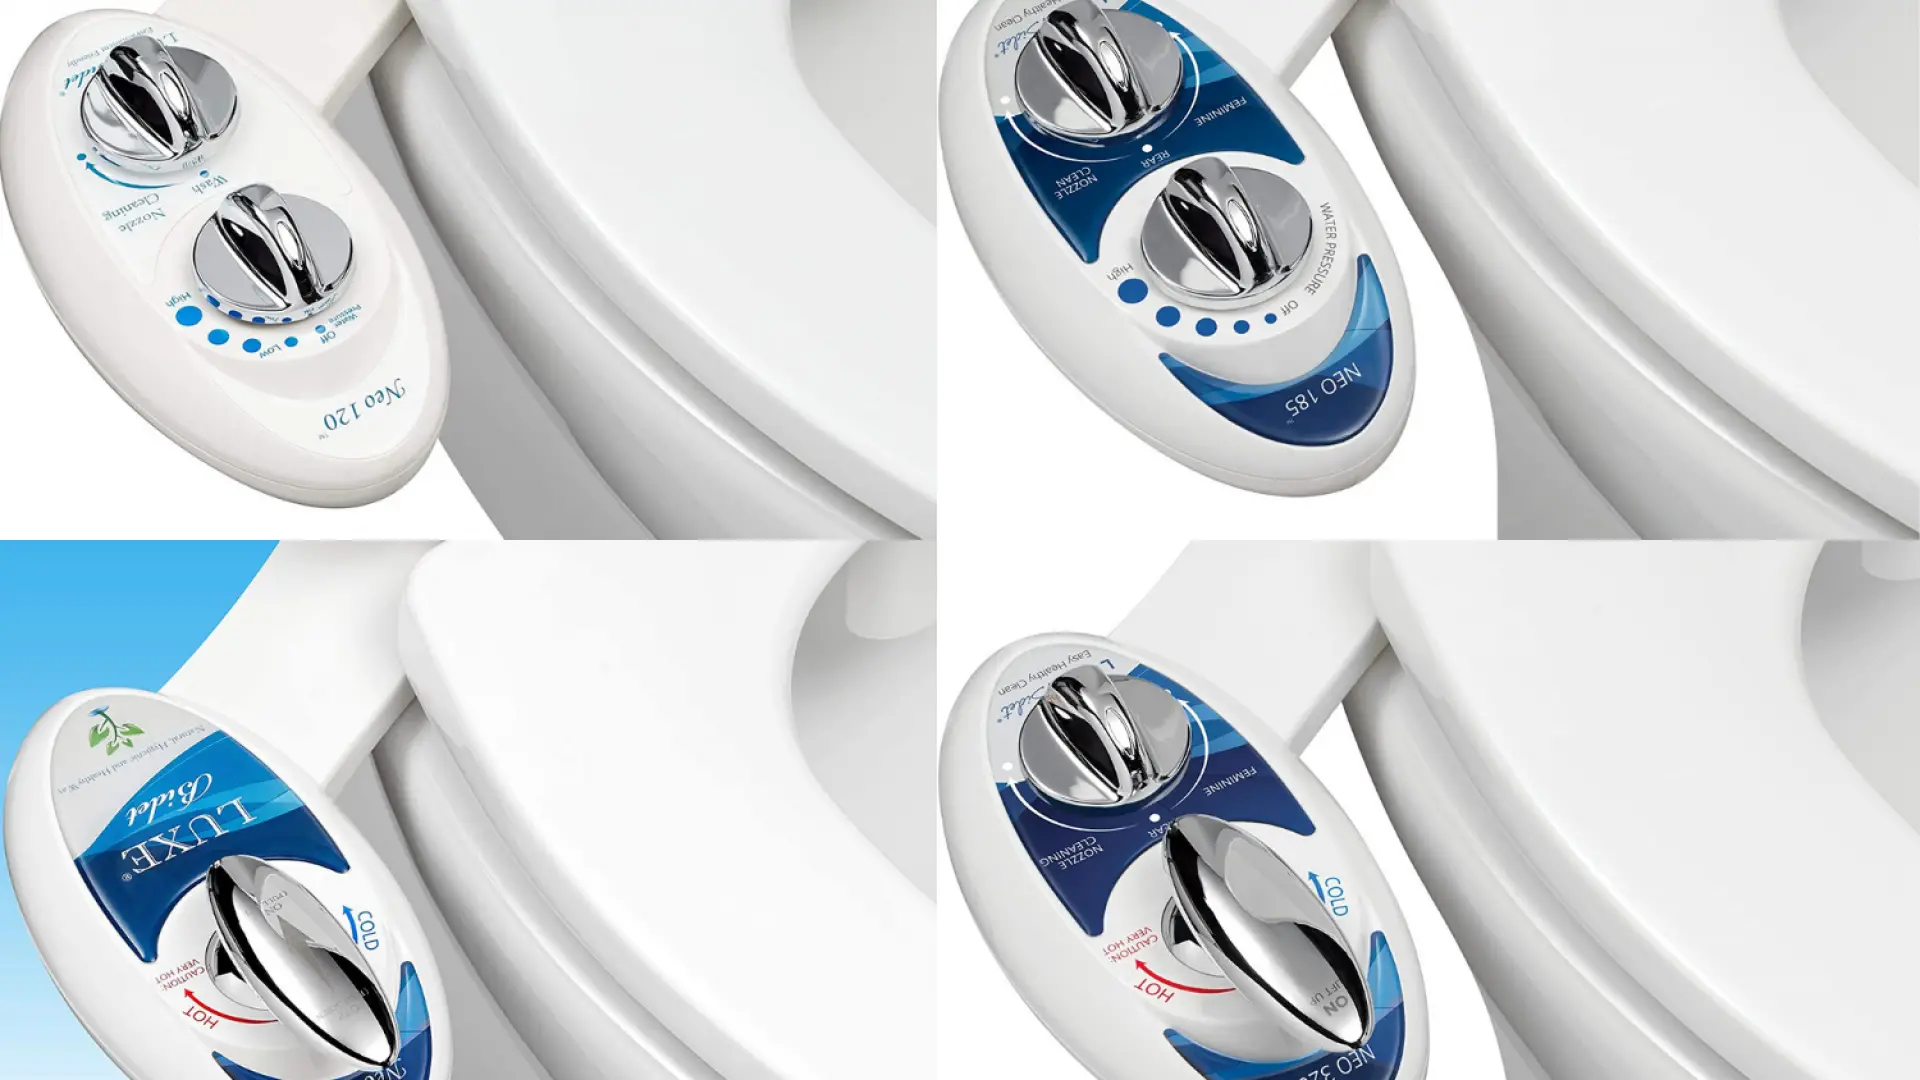 Luxe Bidet: Top 4 Popular Models and Reviews